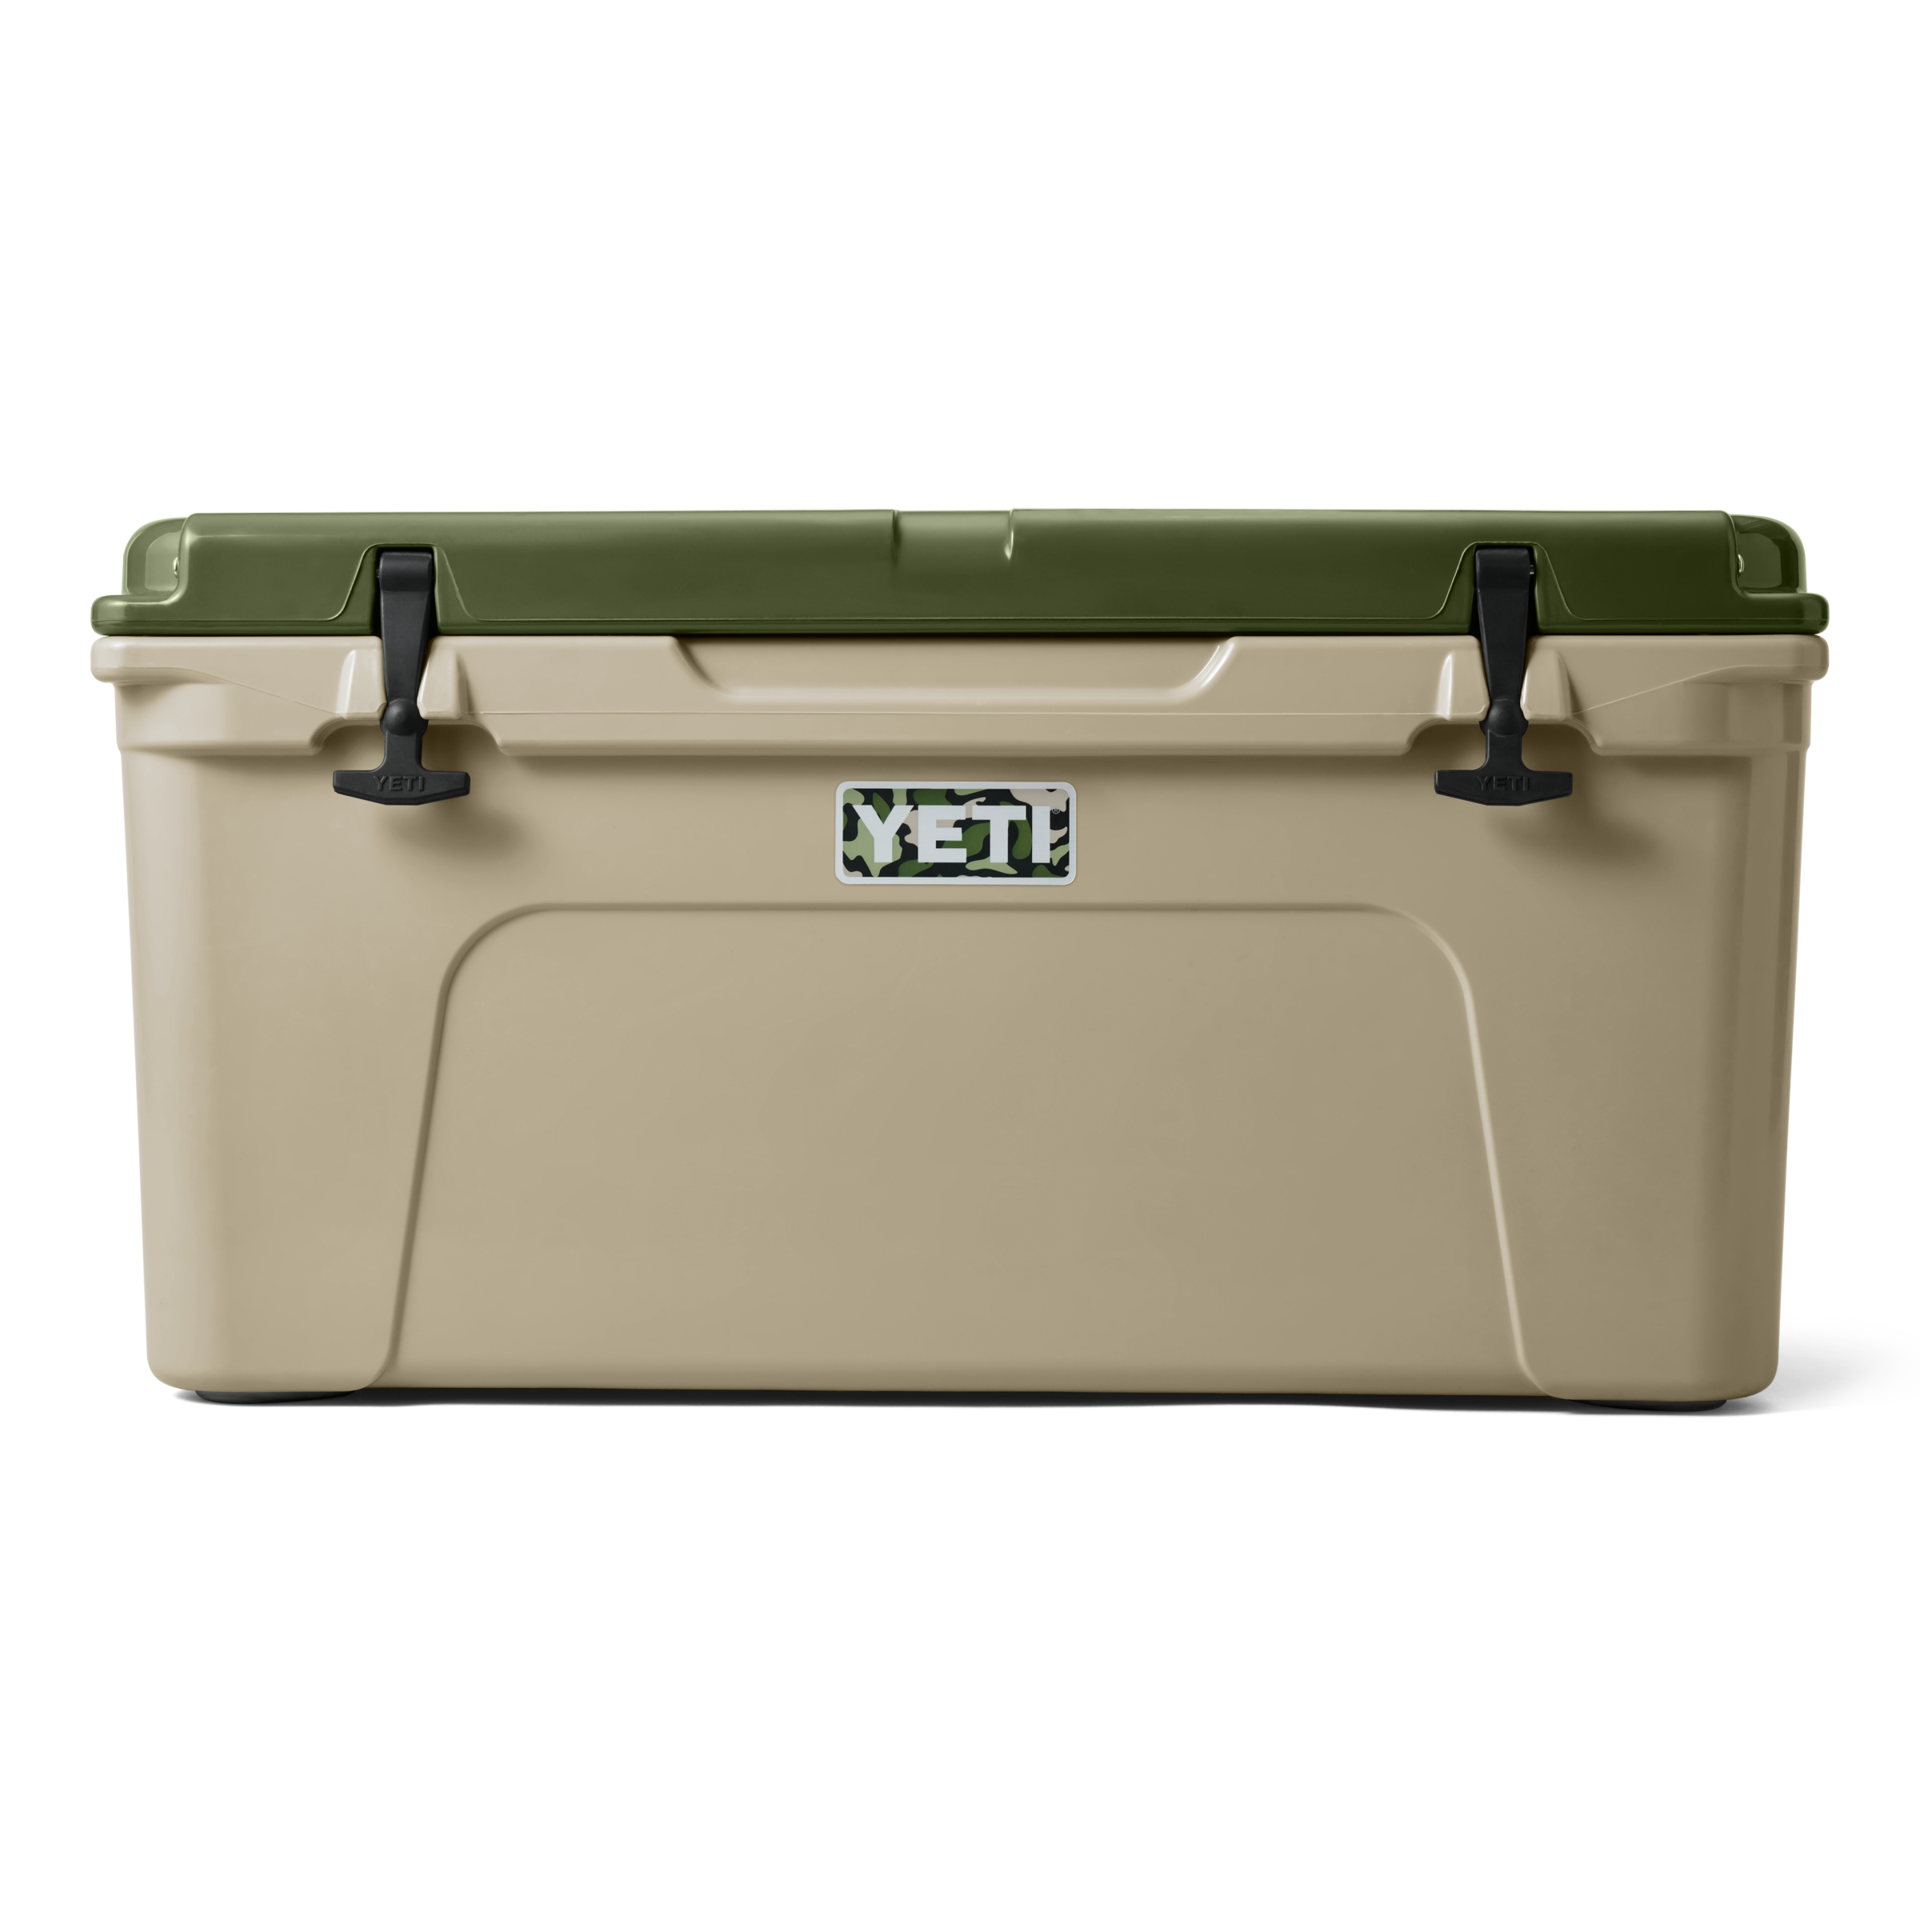 Yeti, Tundra, 65, Cooler, Hard Cooler, Limited, Decoy, Hunting, Camo, Limited Edition